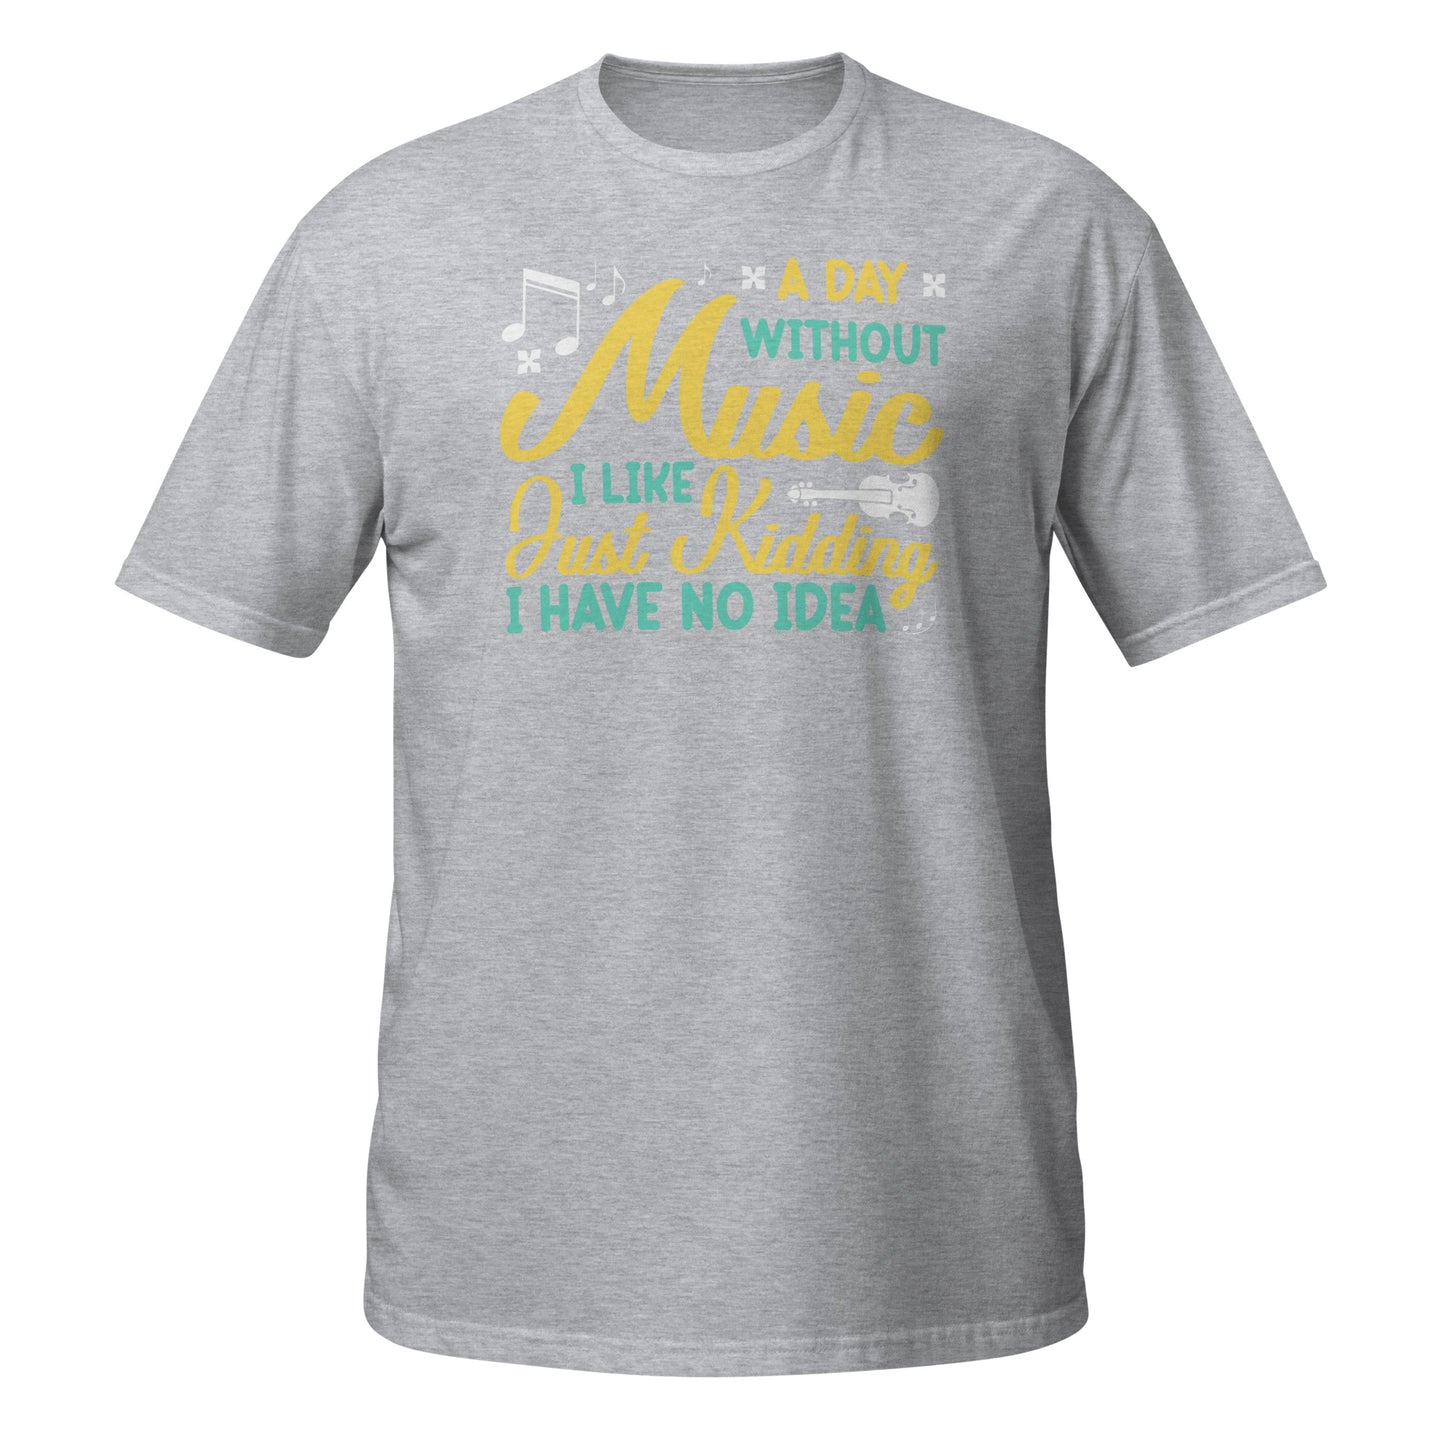 A Day Without Music... I like... Just Kidding I Have No Idea Shirt